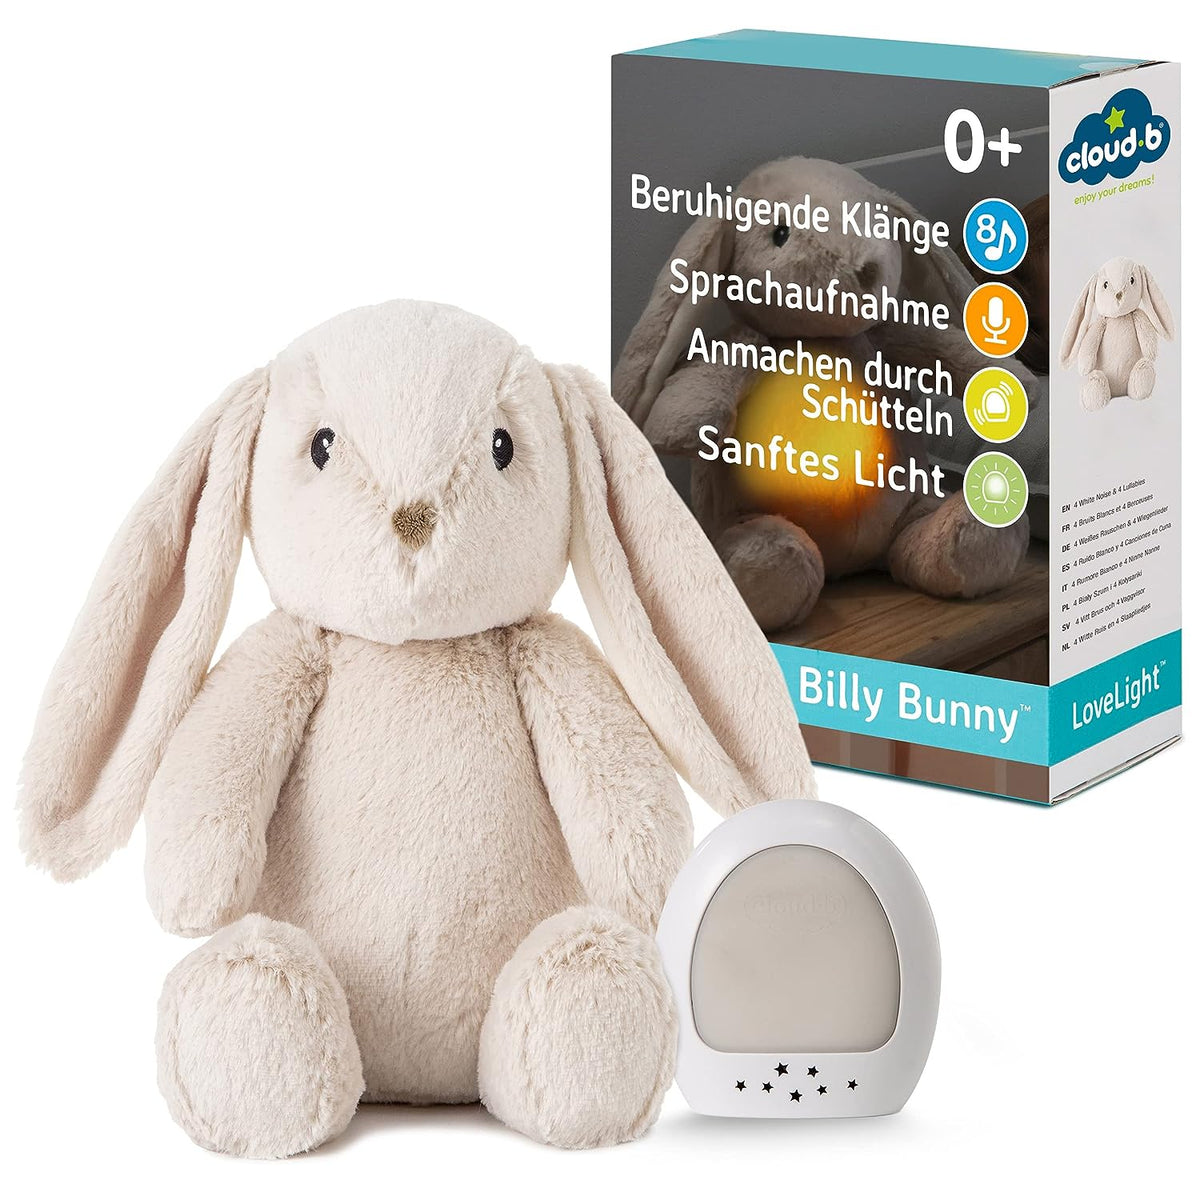 Extraordinary-cuddly-toys-berlindeluxe_rabbit-packaging